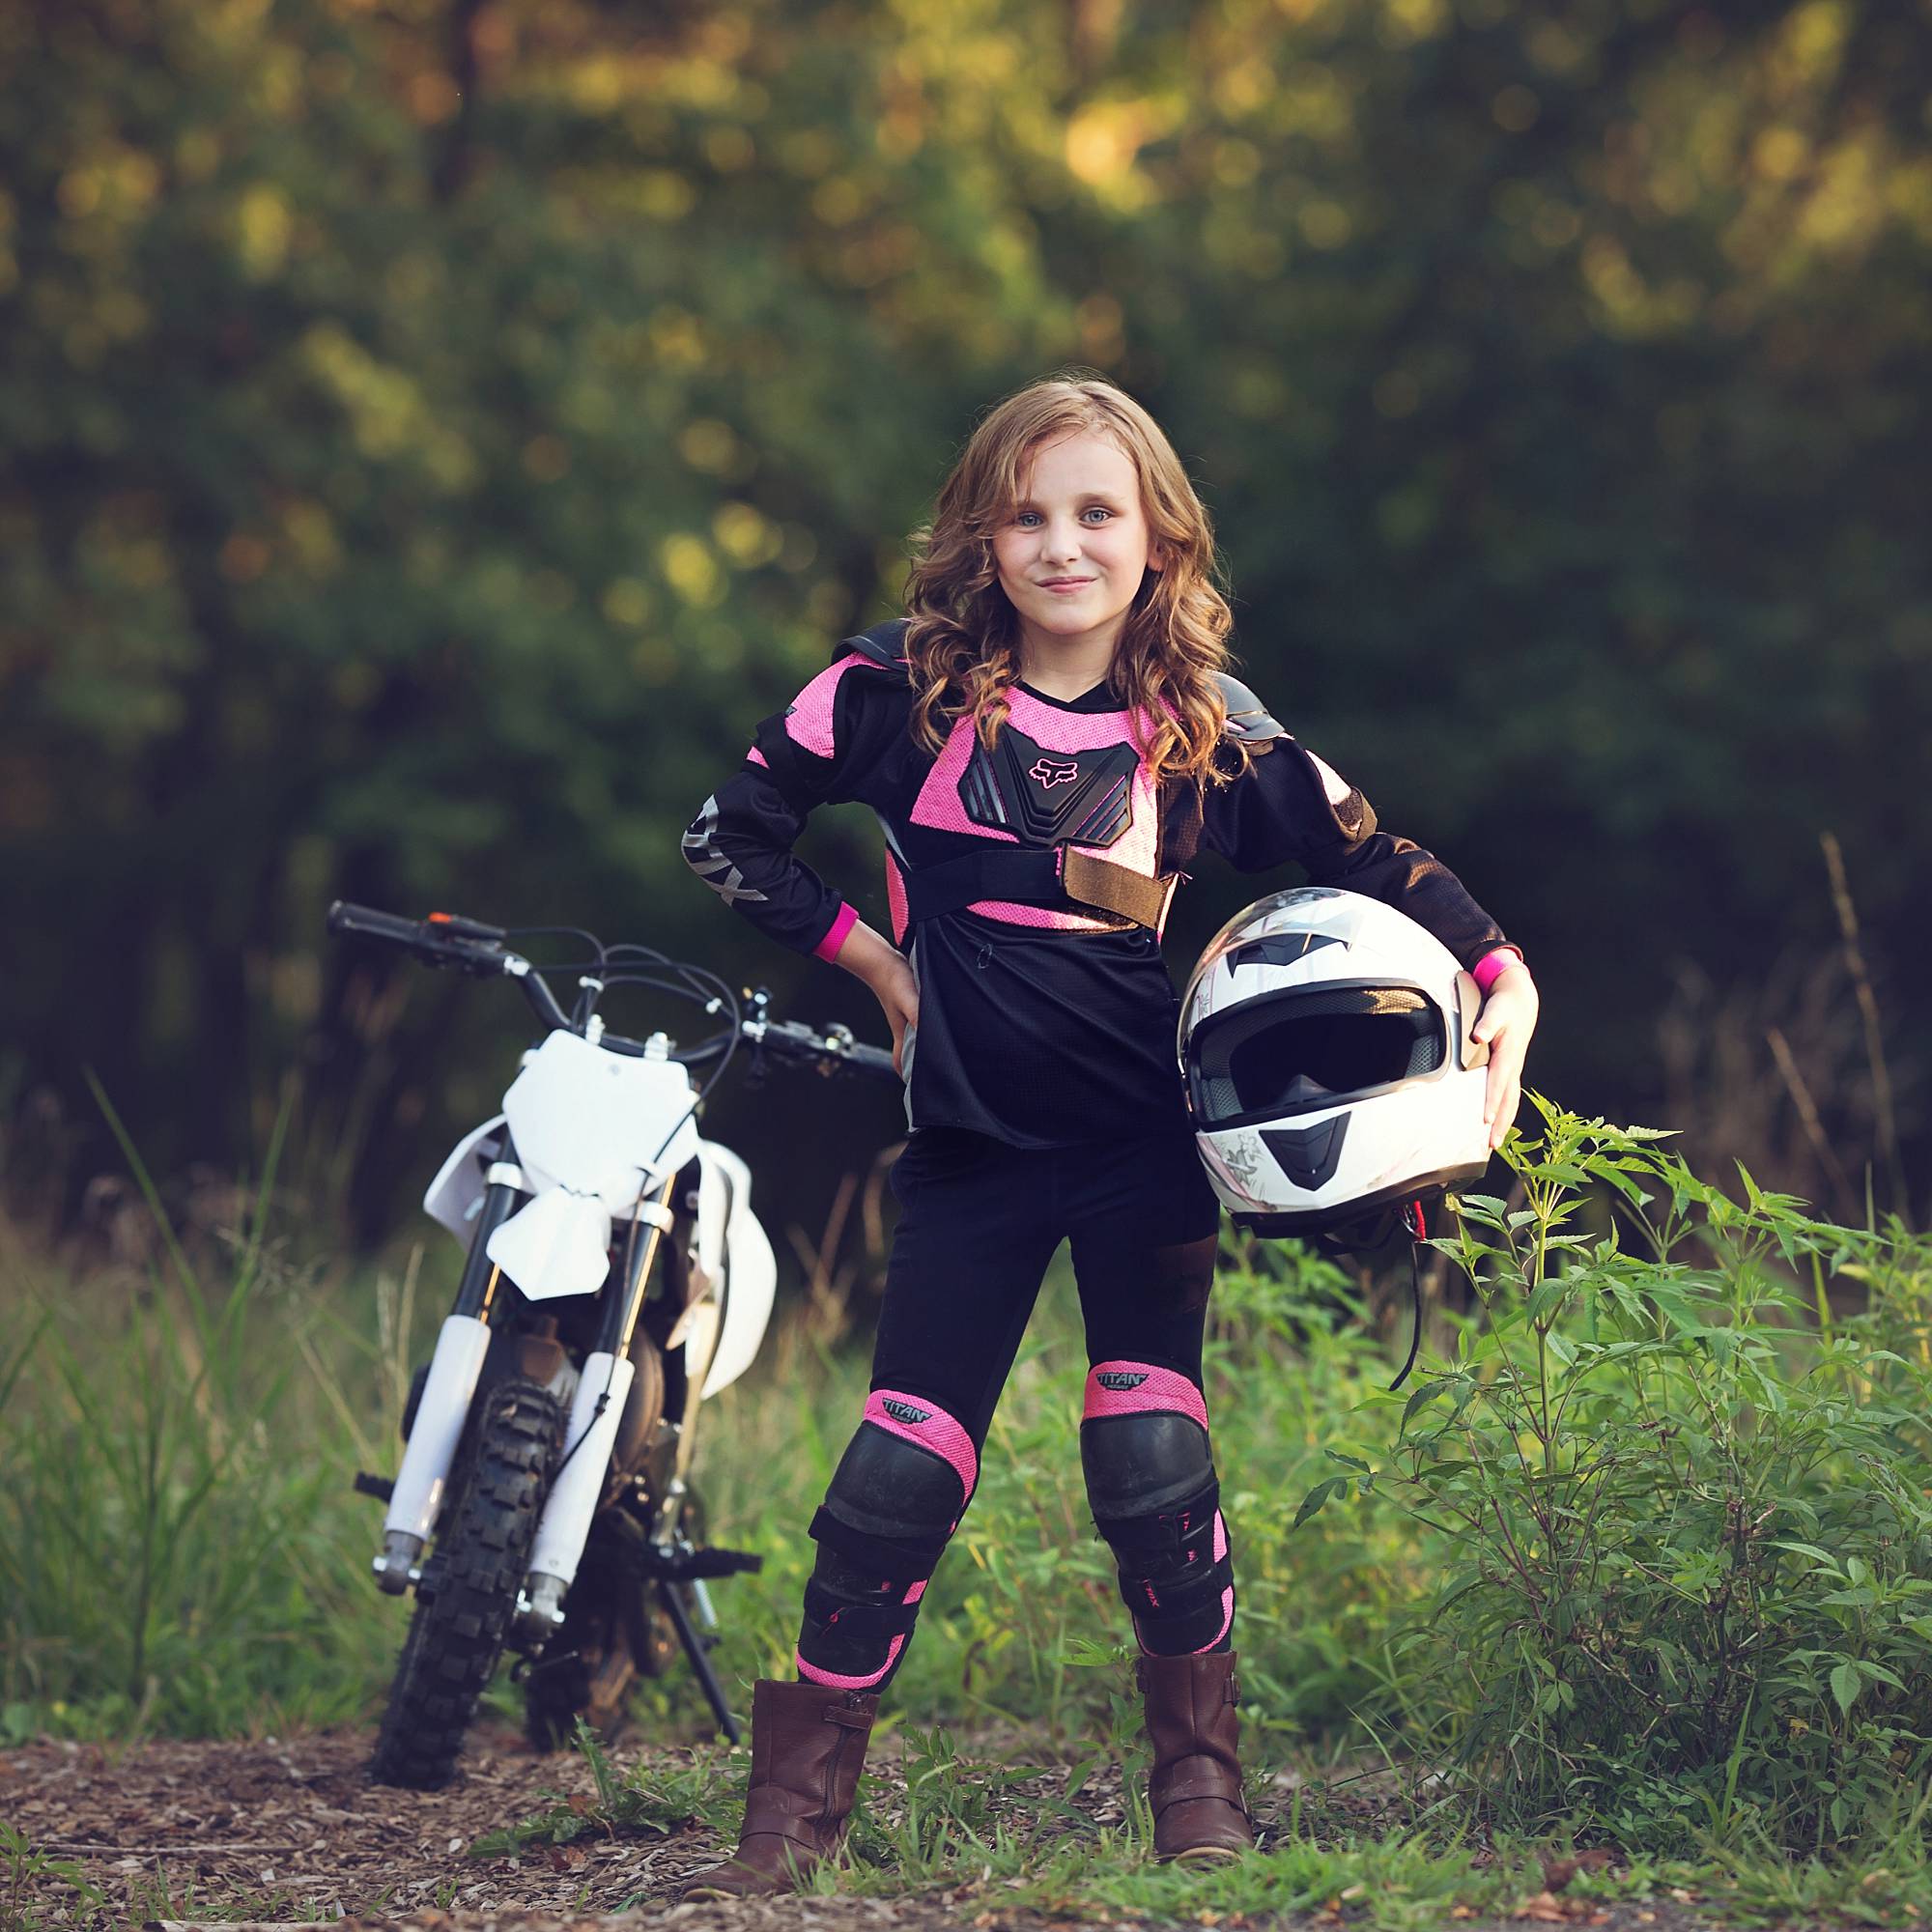 little girl with a white dirt bike. She's wearing a pink and black racing outfit and is holding a white helmet on her hip.